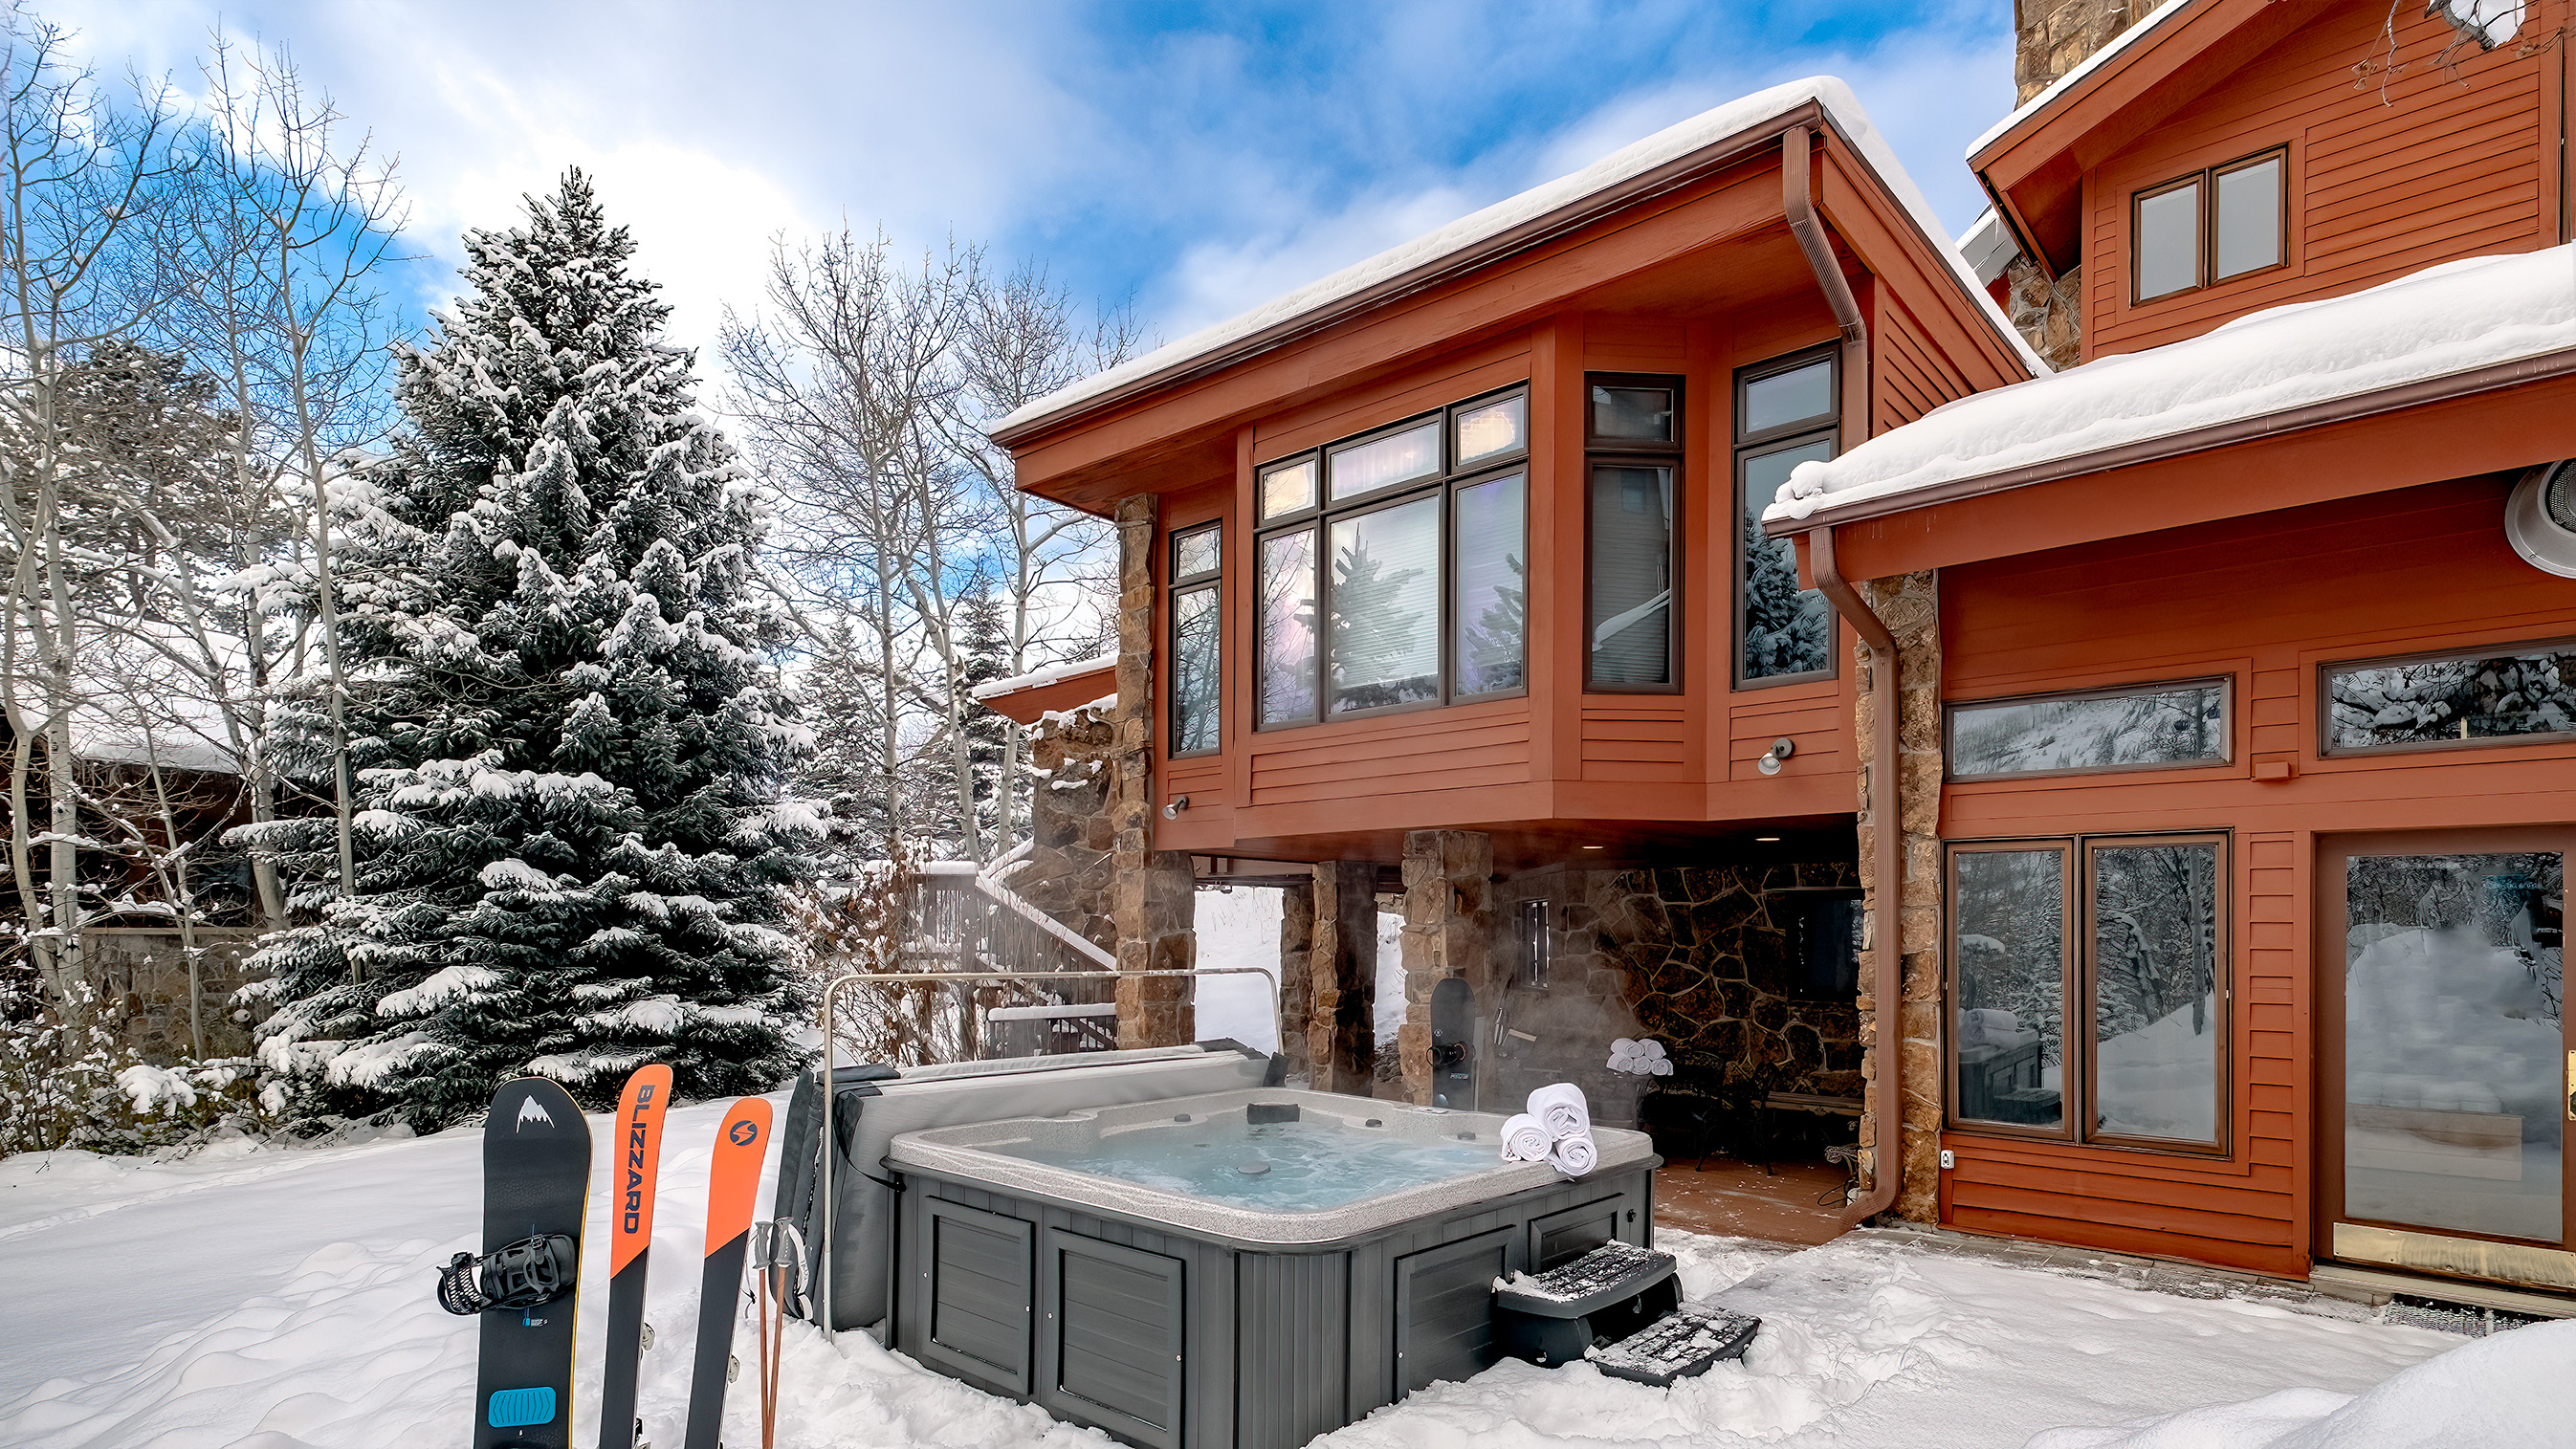 Enjoy the hot tub after a day of powder